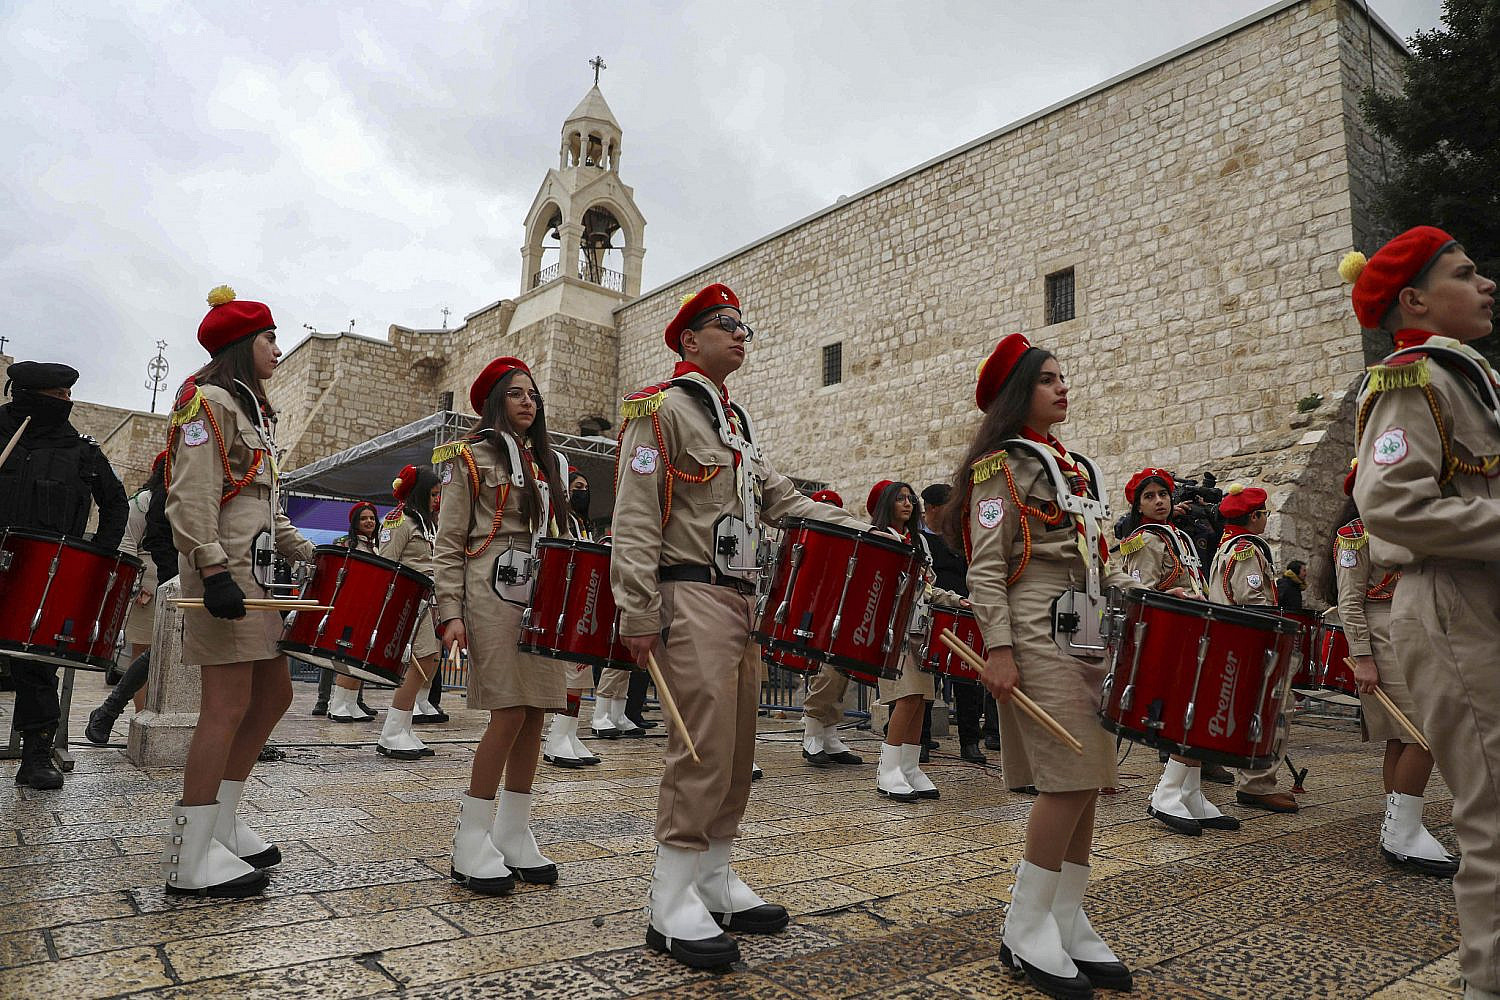 Palestinian scouts participate in a parade as Latin Patriarch Pierbattista Pizzaballa, the top Catholic clergyman in the Holy Land, center, arrives to the Church of the Nativity ahead of the midnight Christmas Mass, in the West Bank town of Bethlehem, Friday, Dec. 24, 2021. (Wisam Hashlamoun/Flash90)